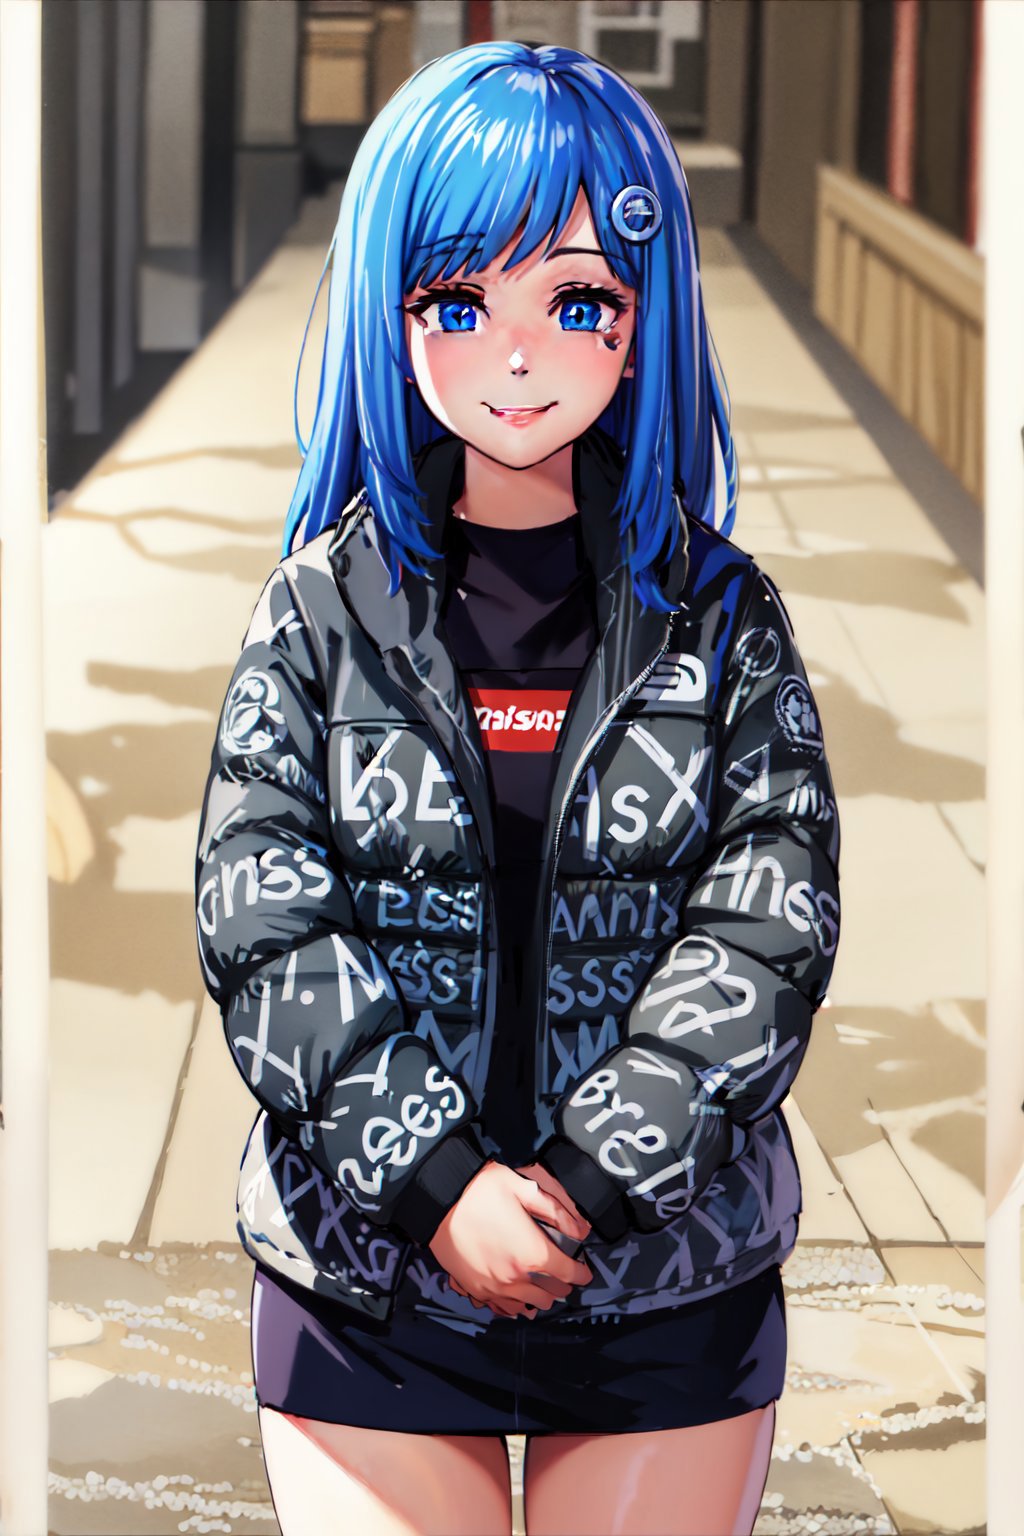 Internet Explorer Chan | Personified Web Browsers image by justTNP